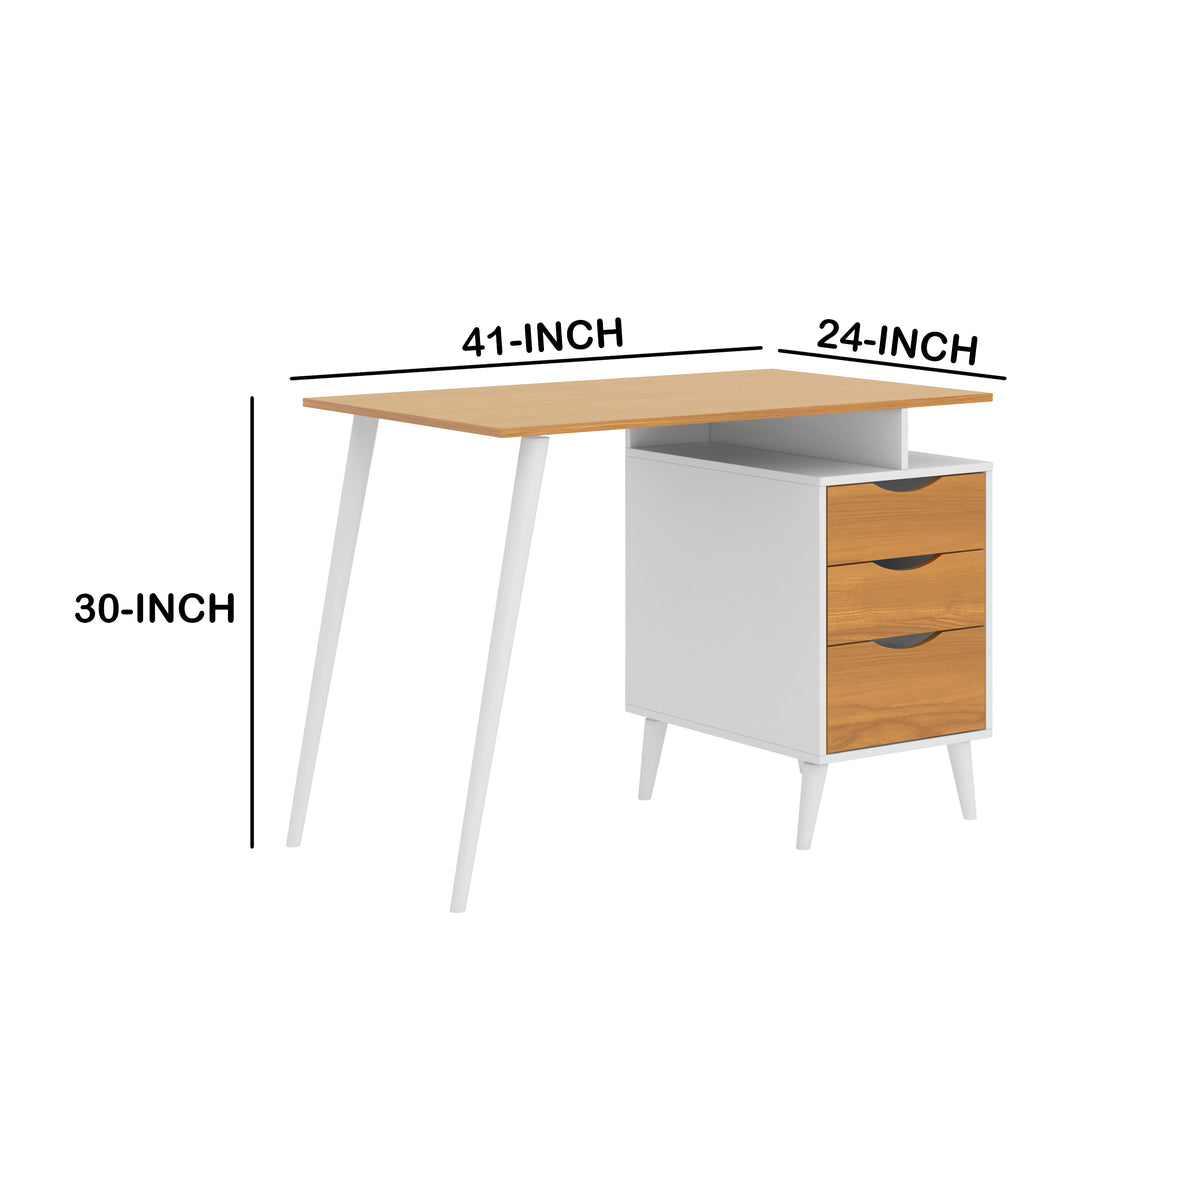 Wooden Office Computer Desk with Angled Legs & Attached File Cabinet, White & Brown - UPT-225270